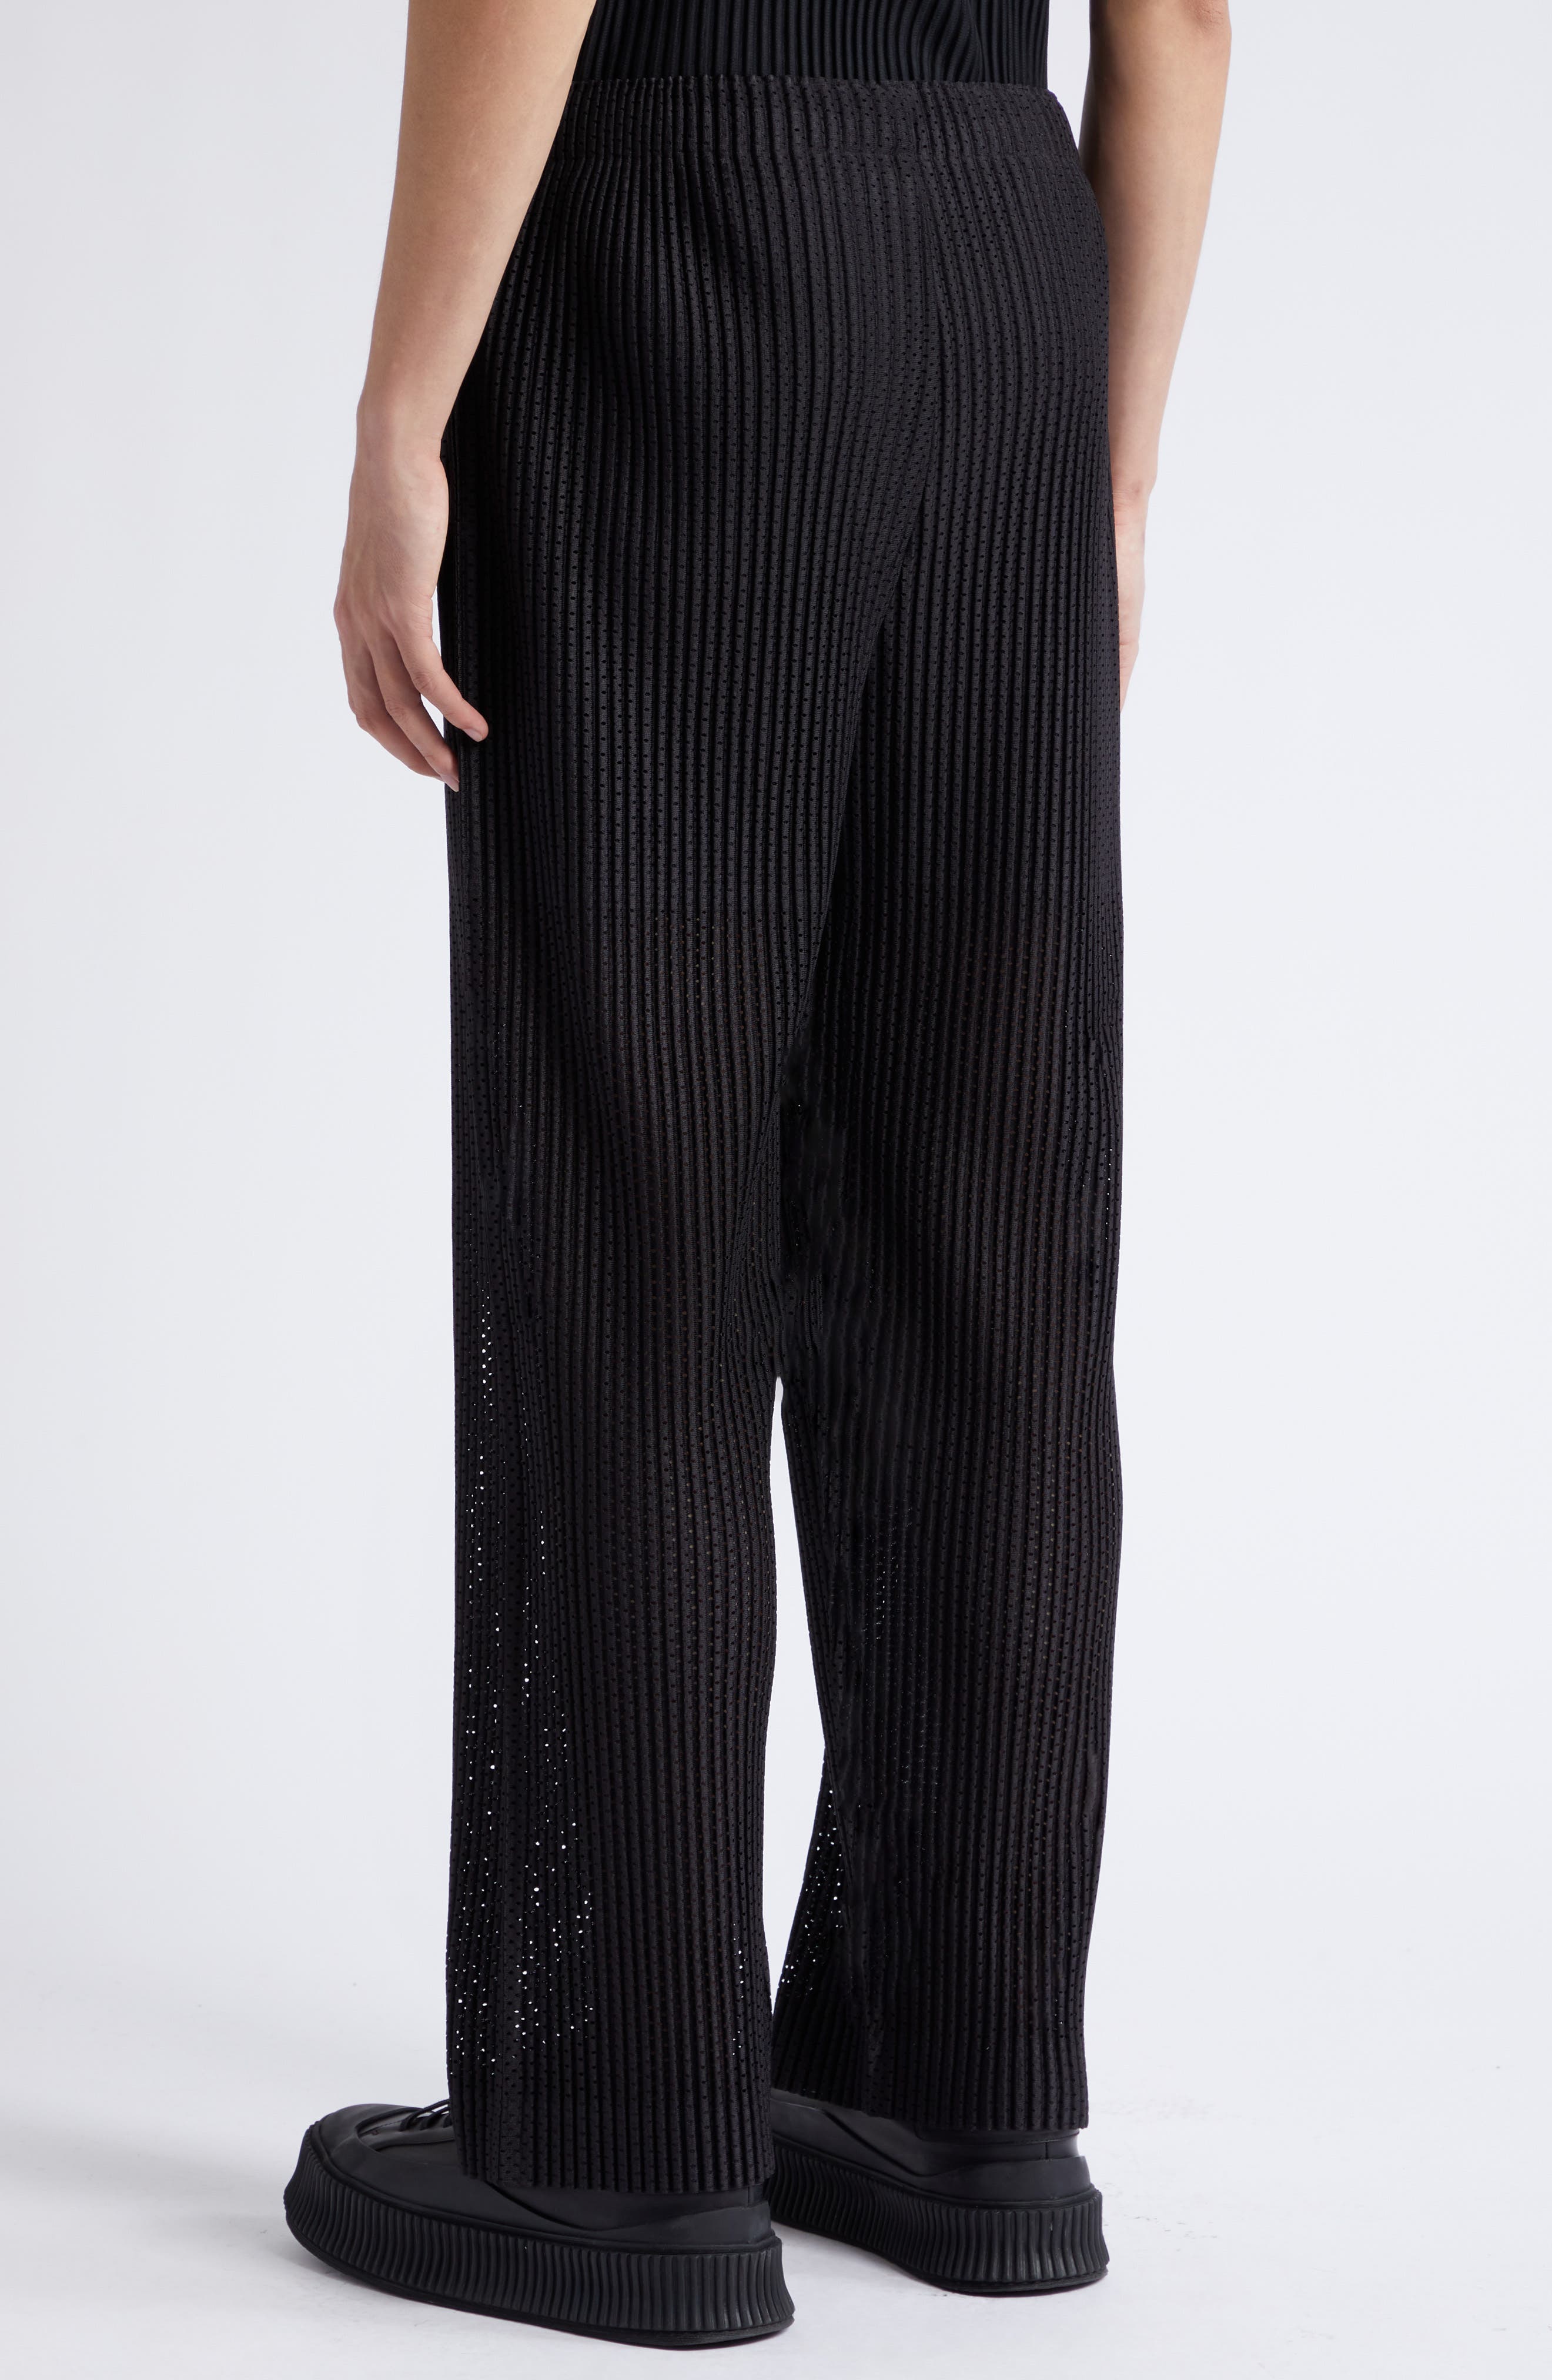 Homme Plissé Issey Miyake Outer Pleated Mesh Pants   Nordstrom